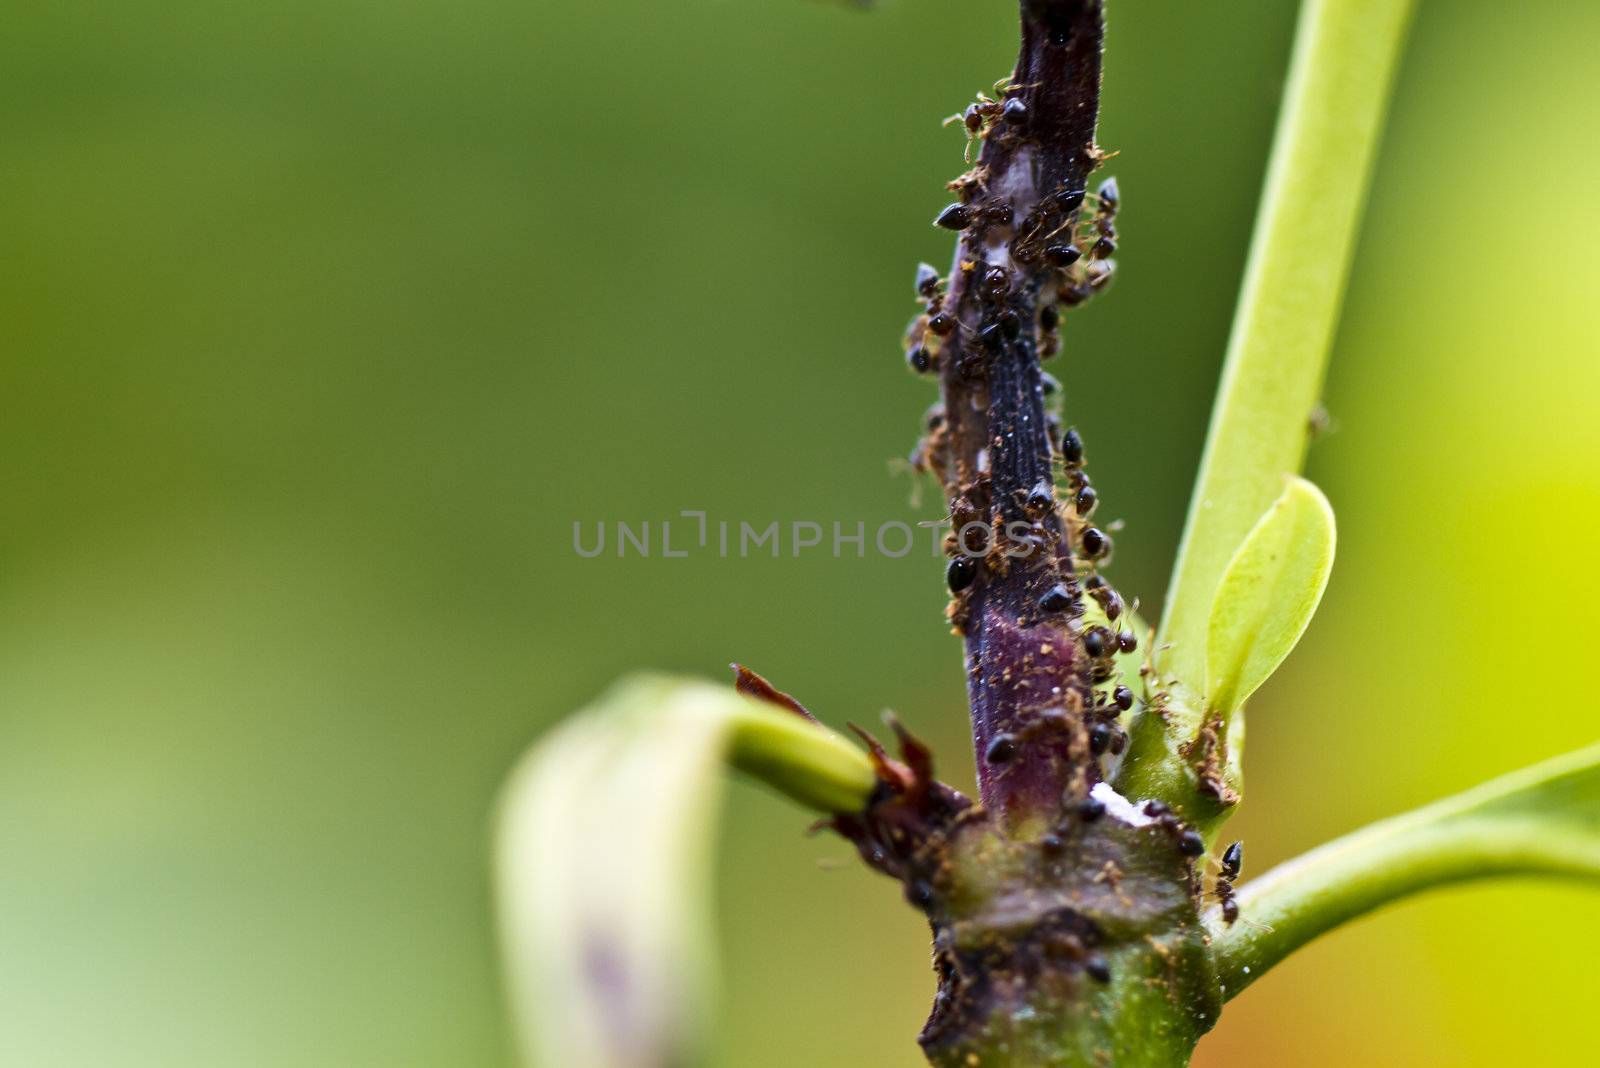 Ants on Dried Shoot by azamshah72